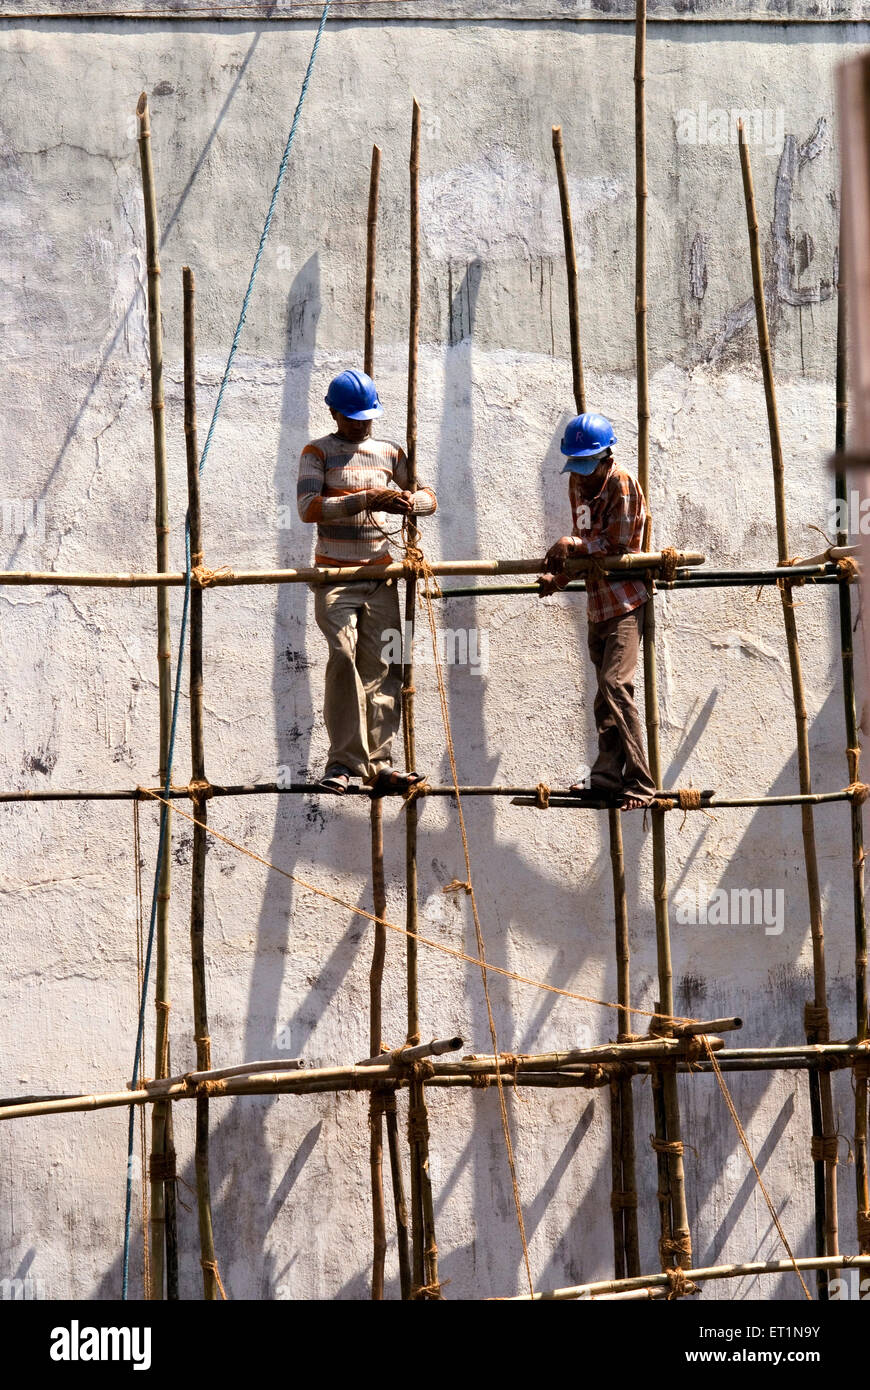 Construction workers tying bamboos with rope Stock Photo